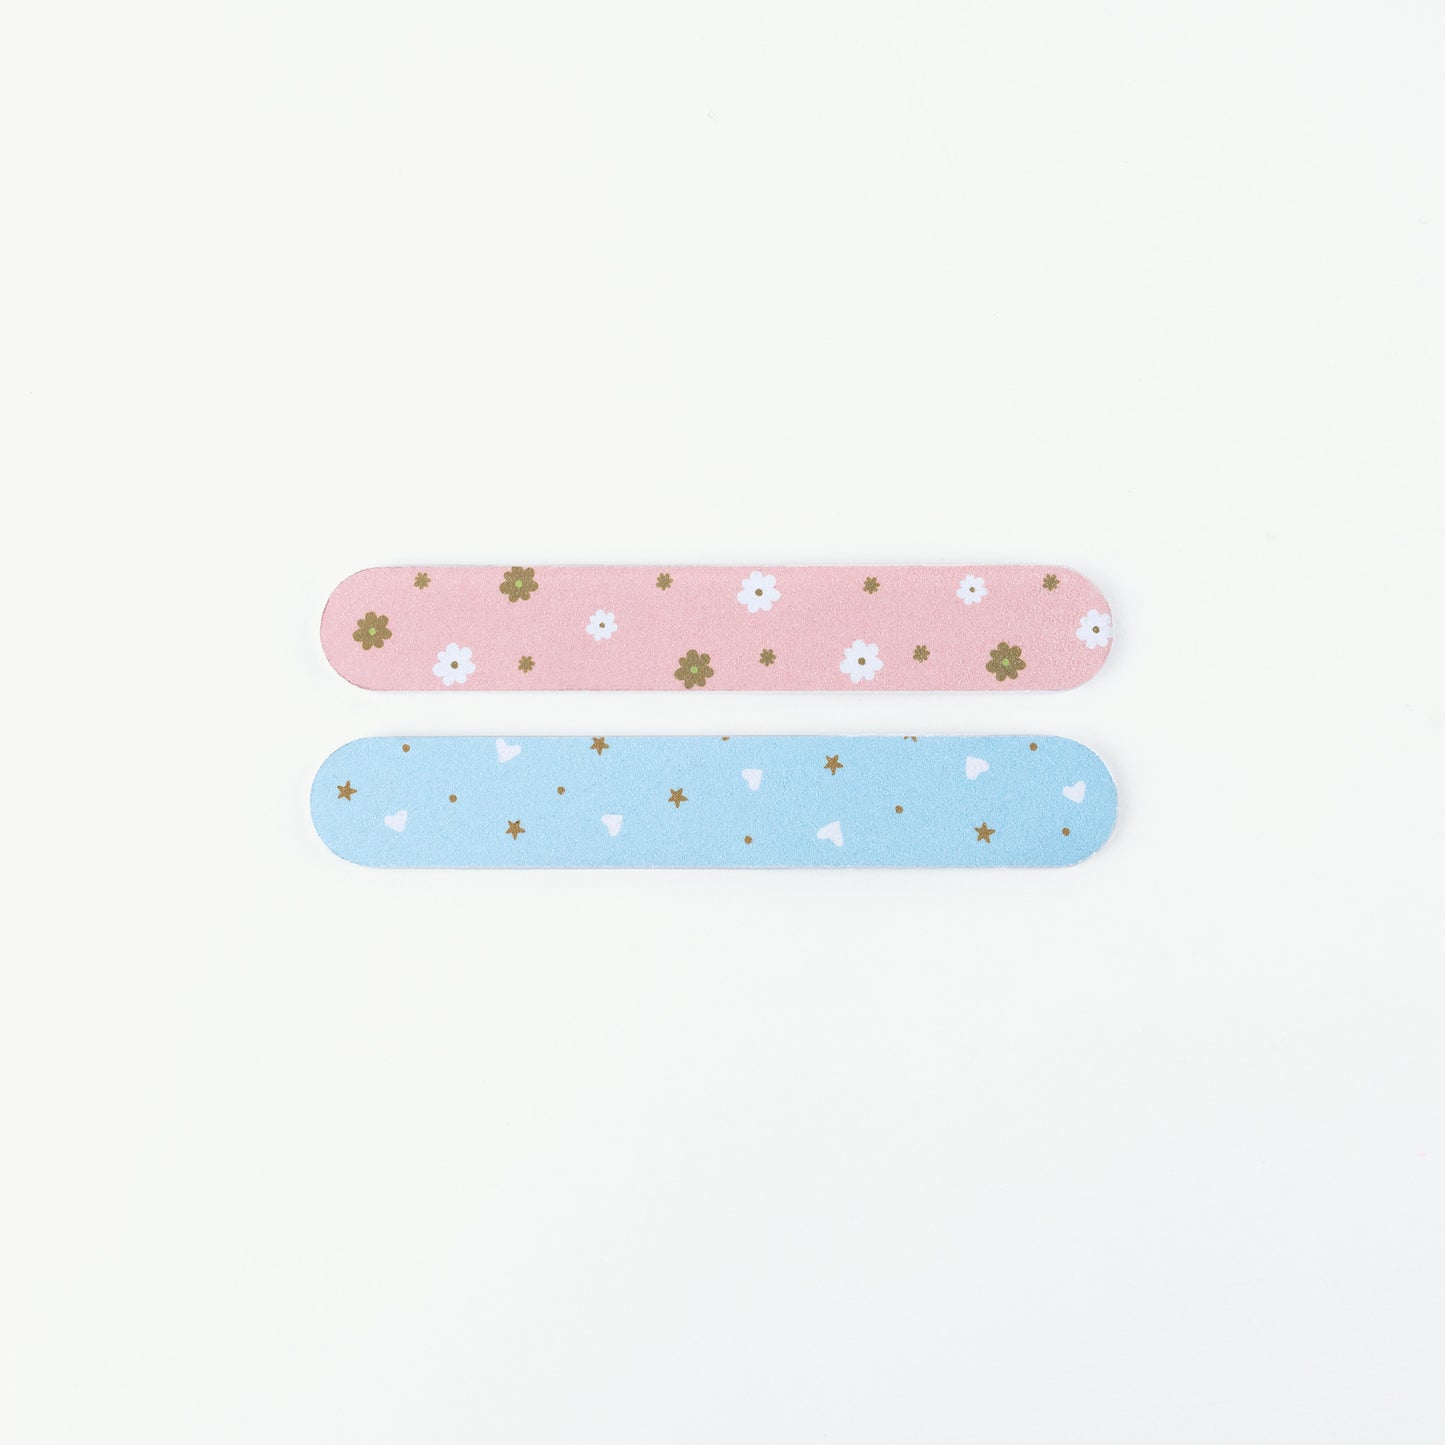 Oh Flossy Kids Nail Files - 2 Pack